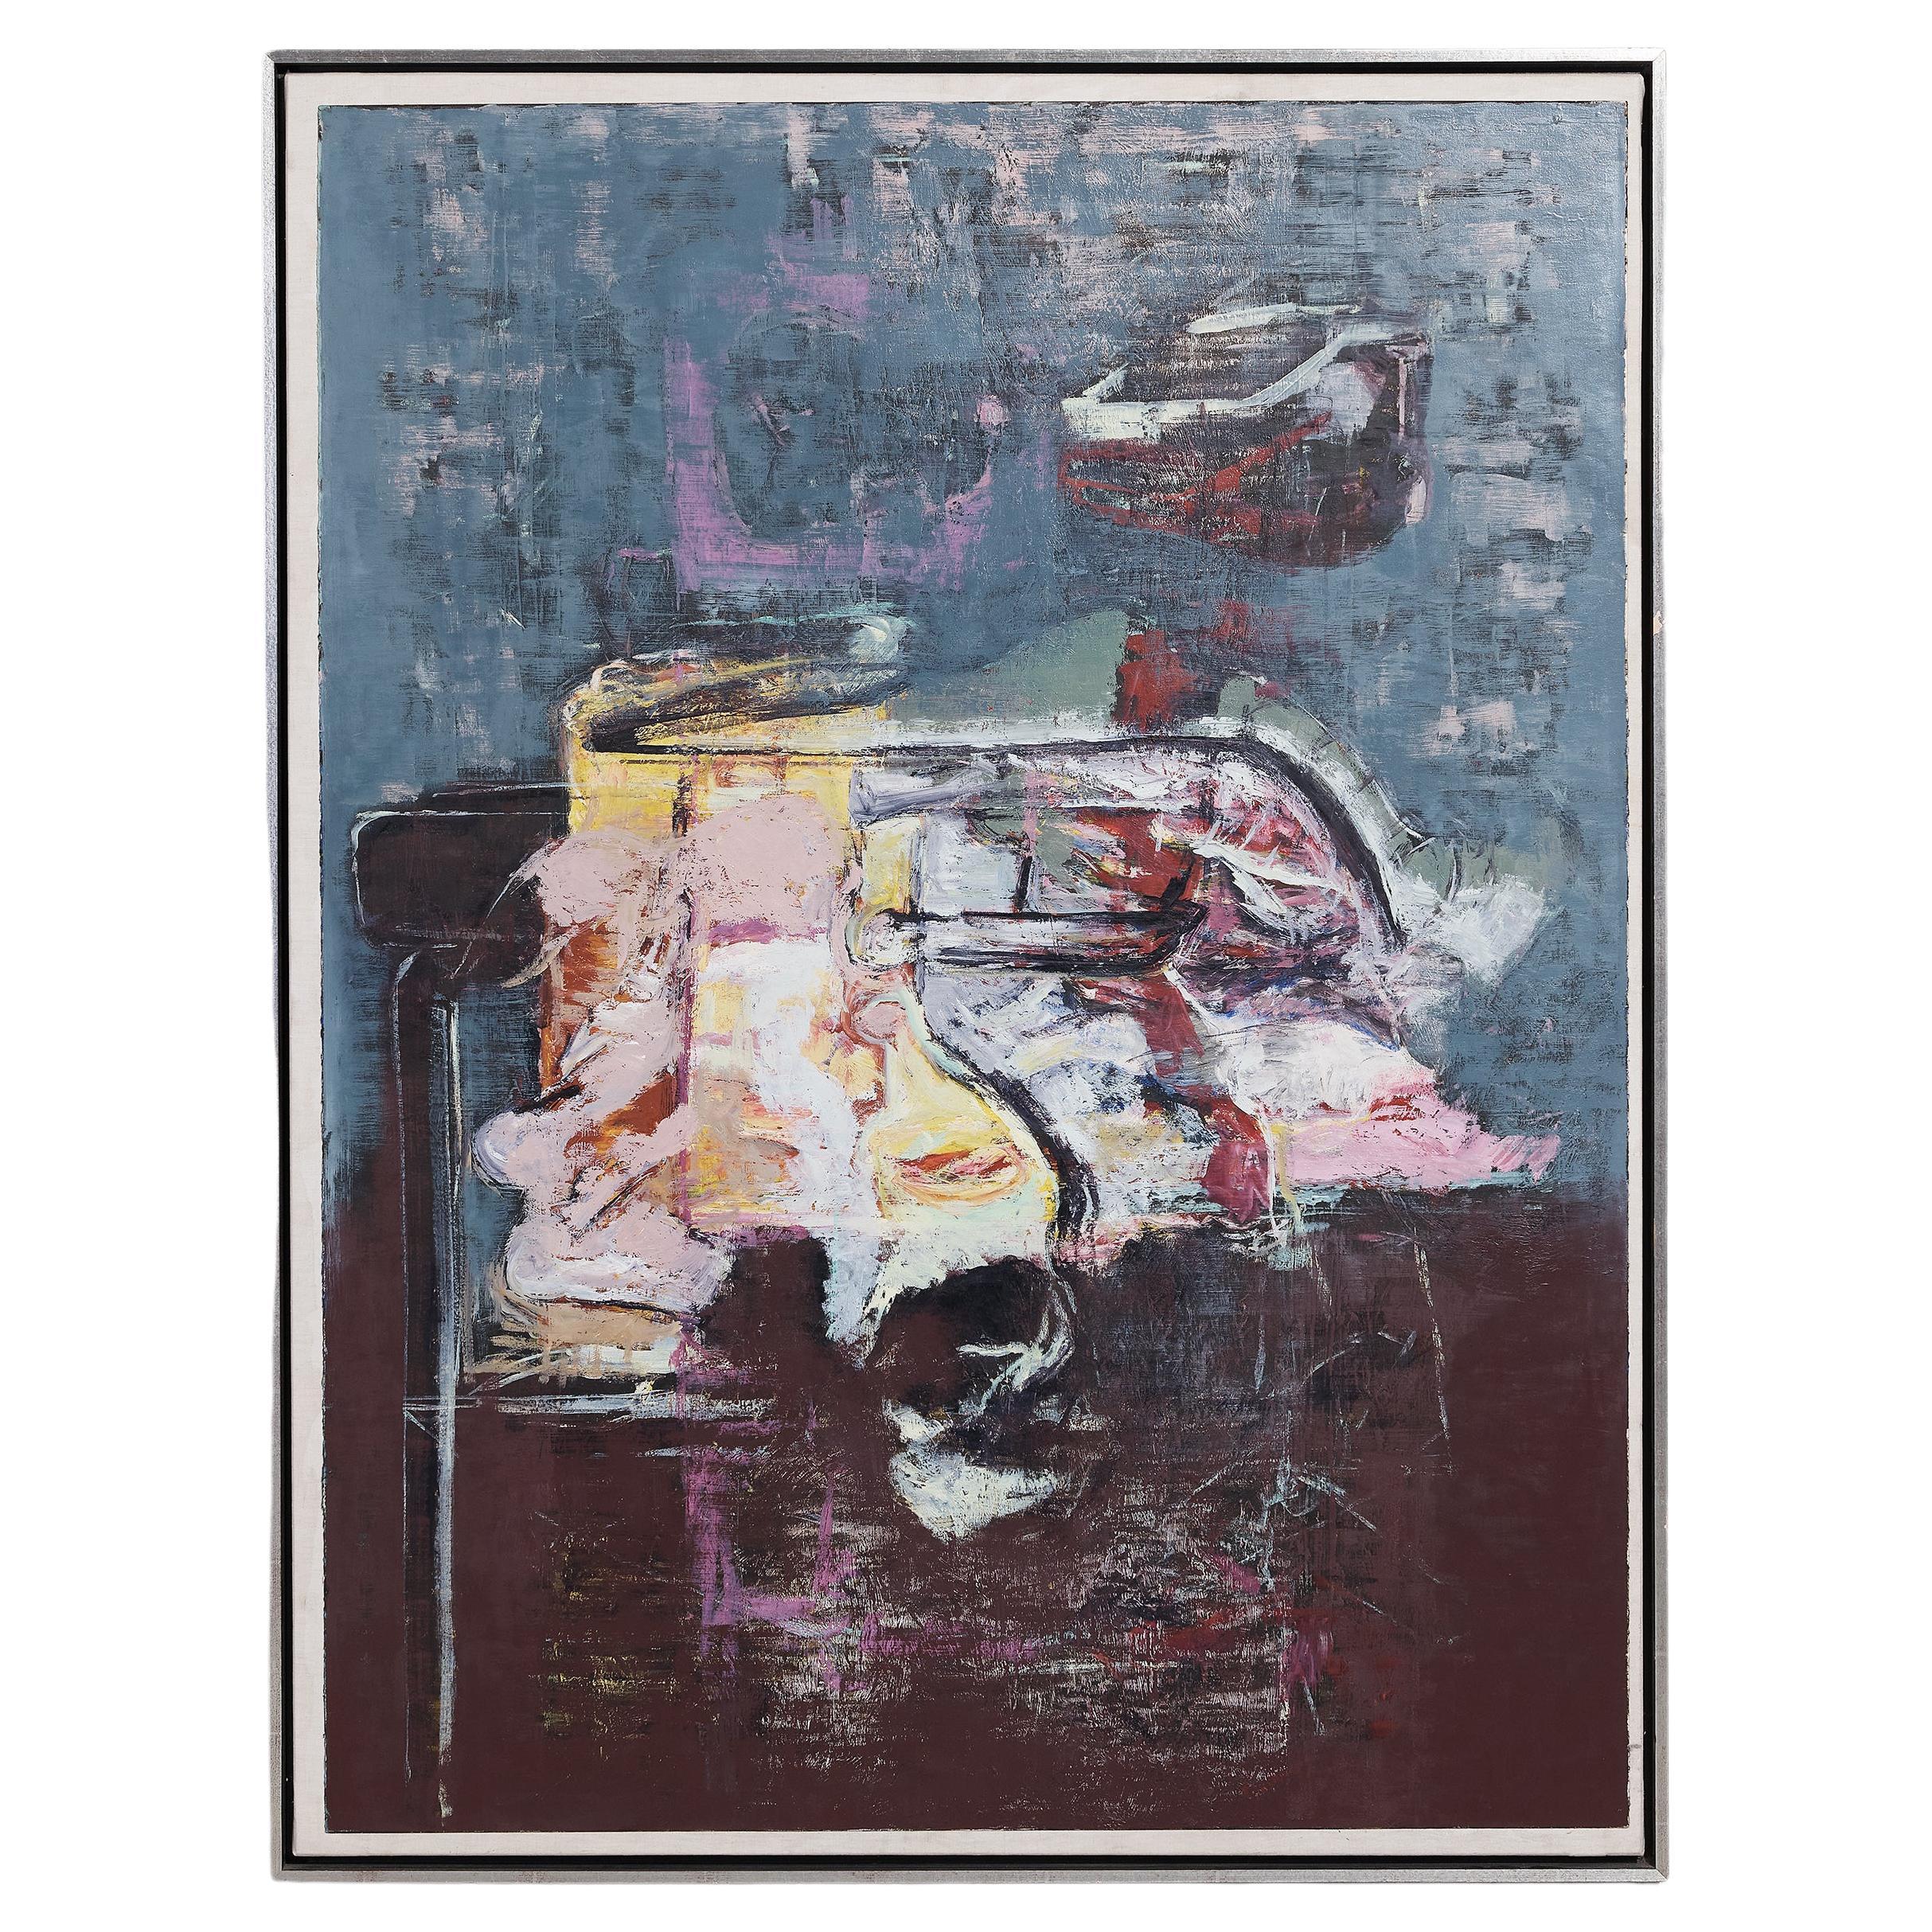 A Contemporary Abstract Painting by Miguel Ybáñez (Born 1946)